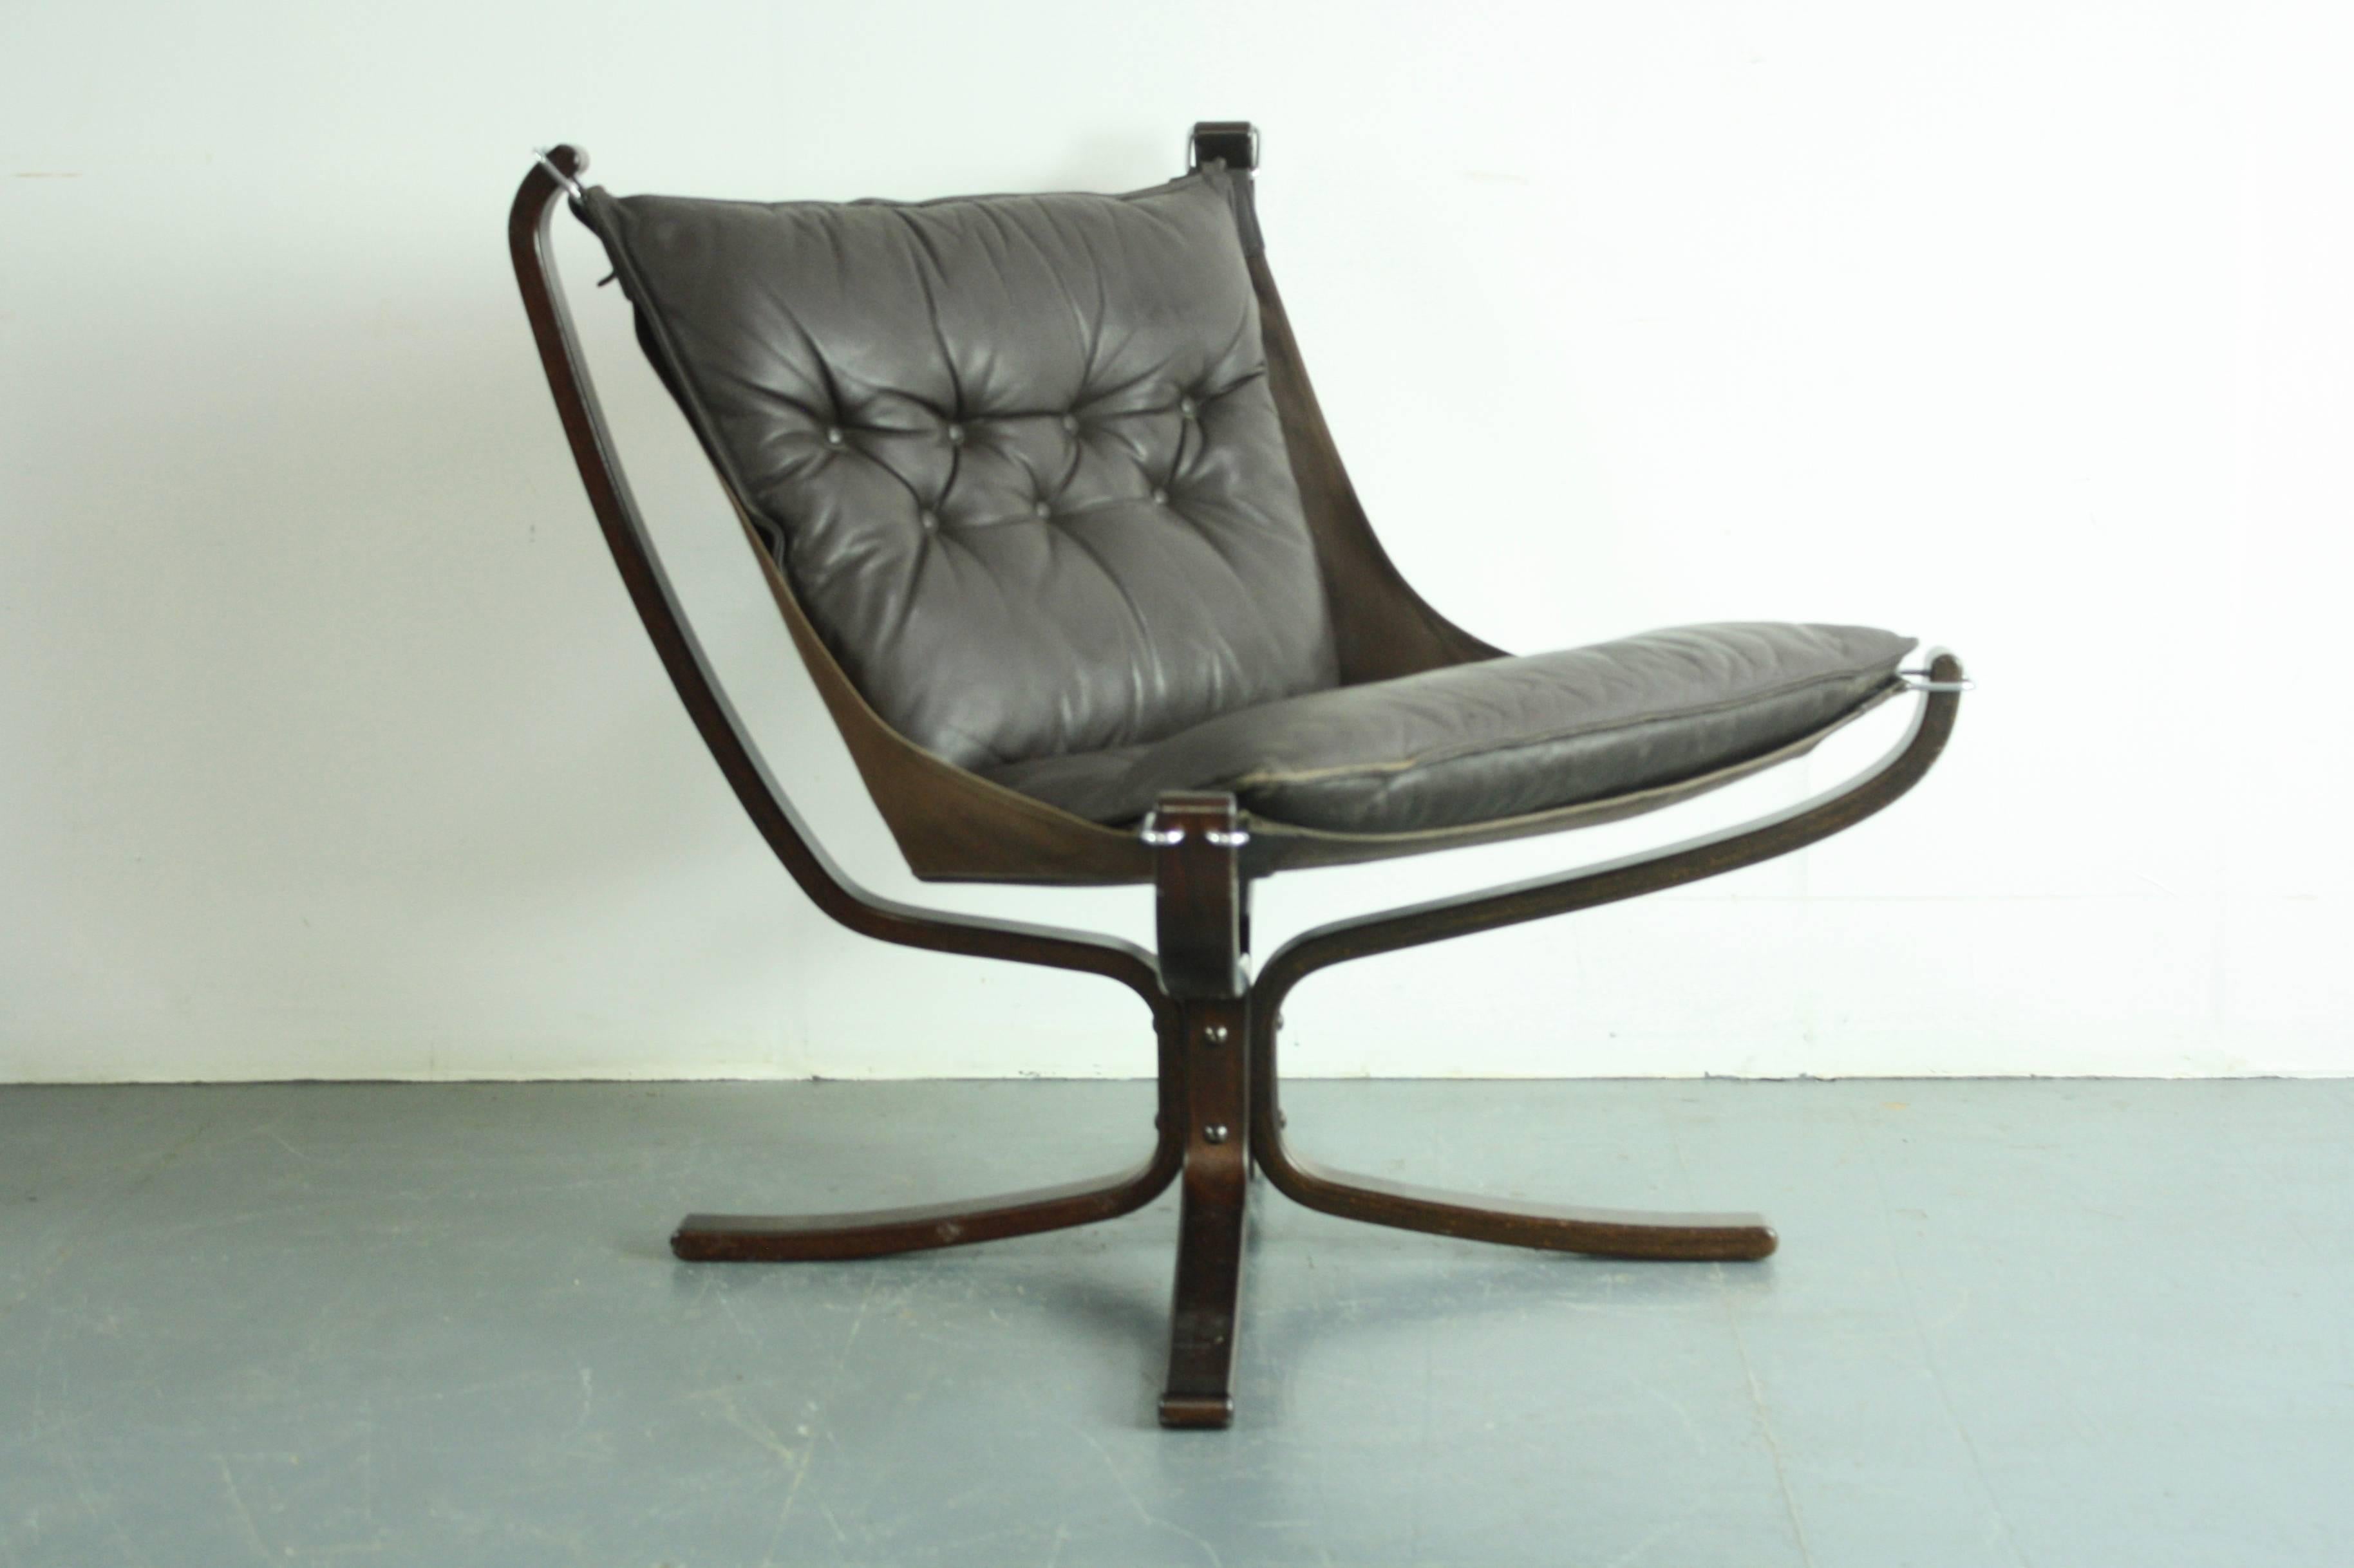 Lovely low back brown leather Falcon chair designed by the Norwegian designer, Sigurd Resell, in the 1970s. With rosewood base which is an X-shape. 

In good vintage condition. The leather is in good condition for its age with no rips or tears -